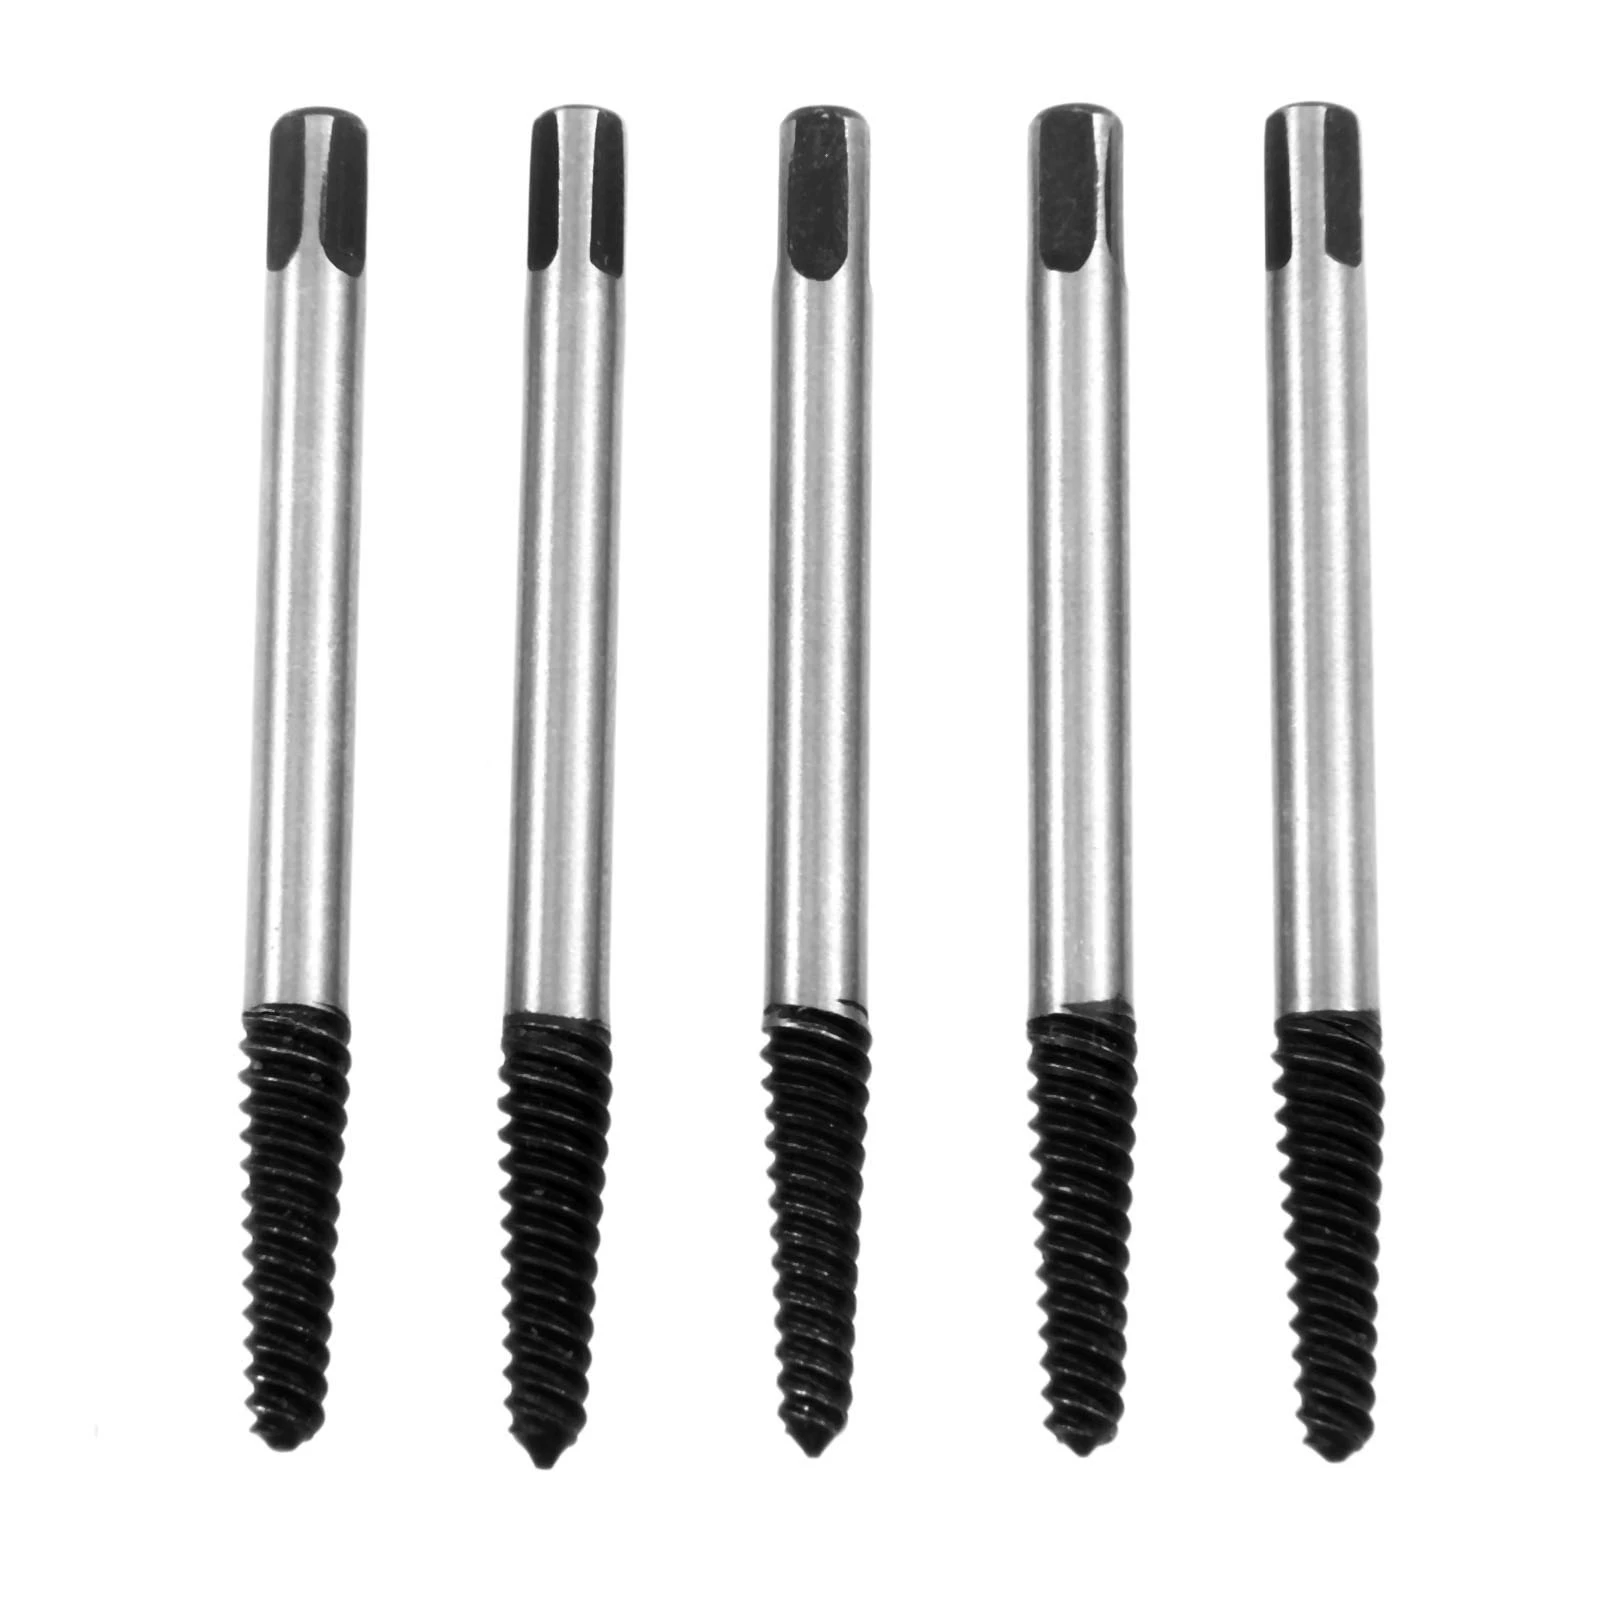 DRELD 5Pcs Steel Damaged Broken Screws Extractor Drill Bits Removal Tool Damaged Bolts Screws Remover Speed Out Screw Drivers 1#